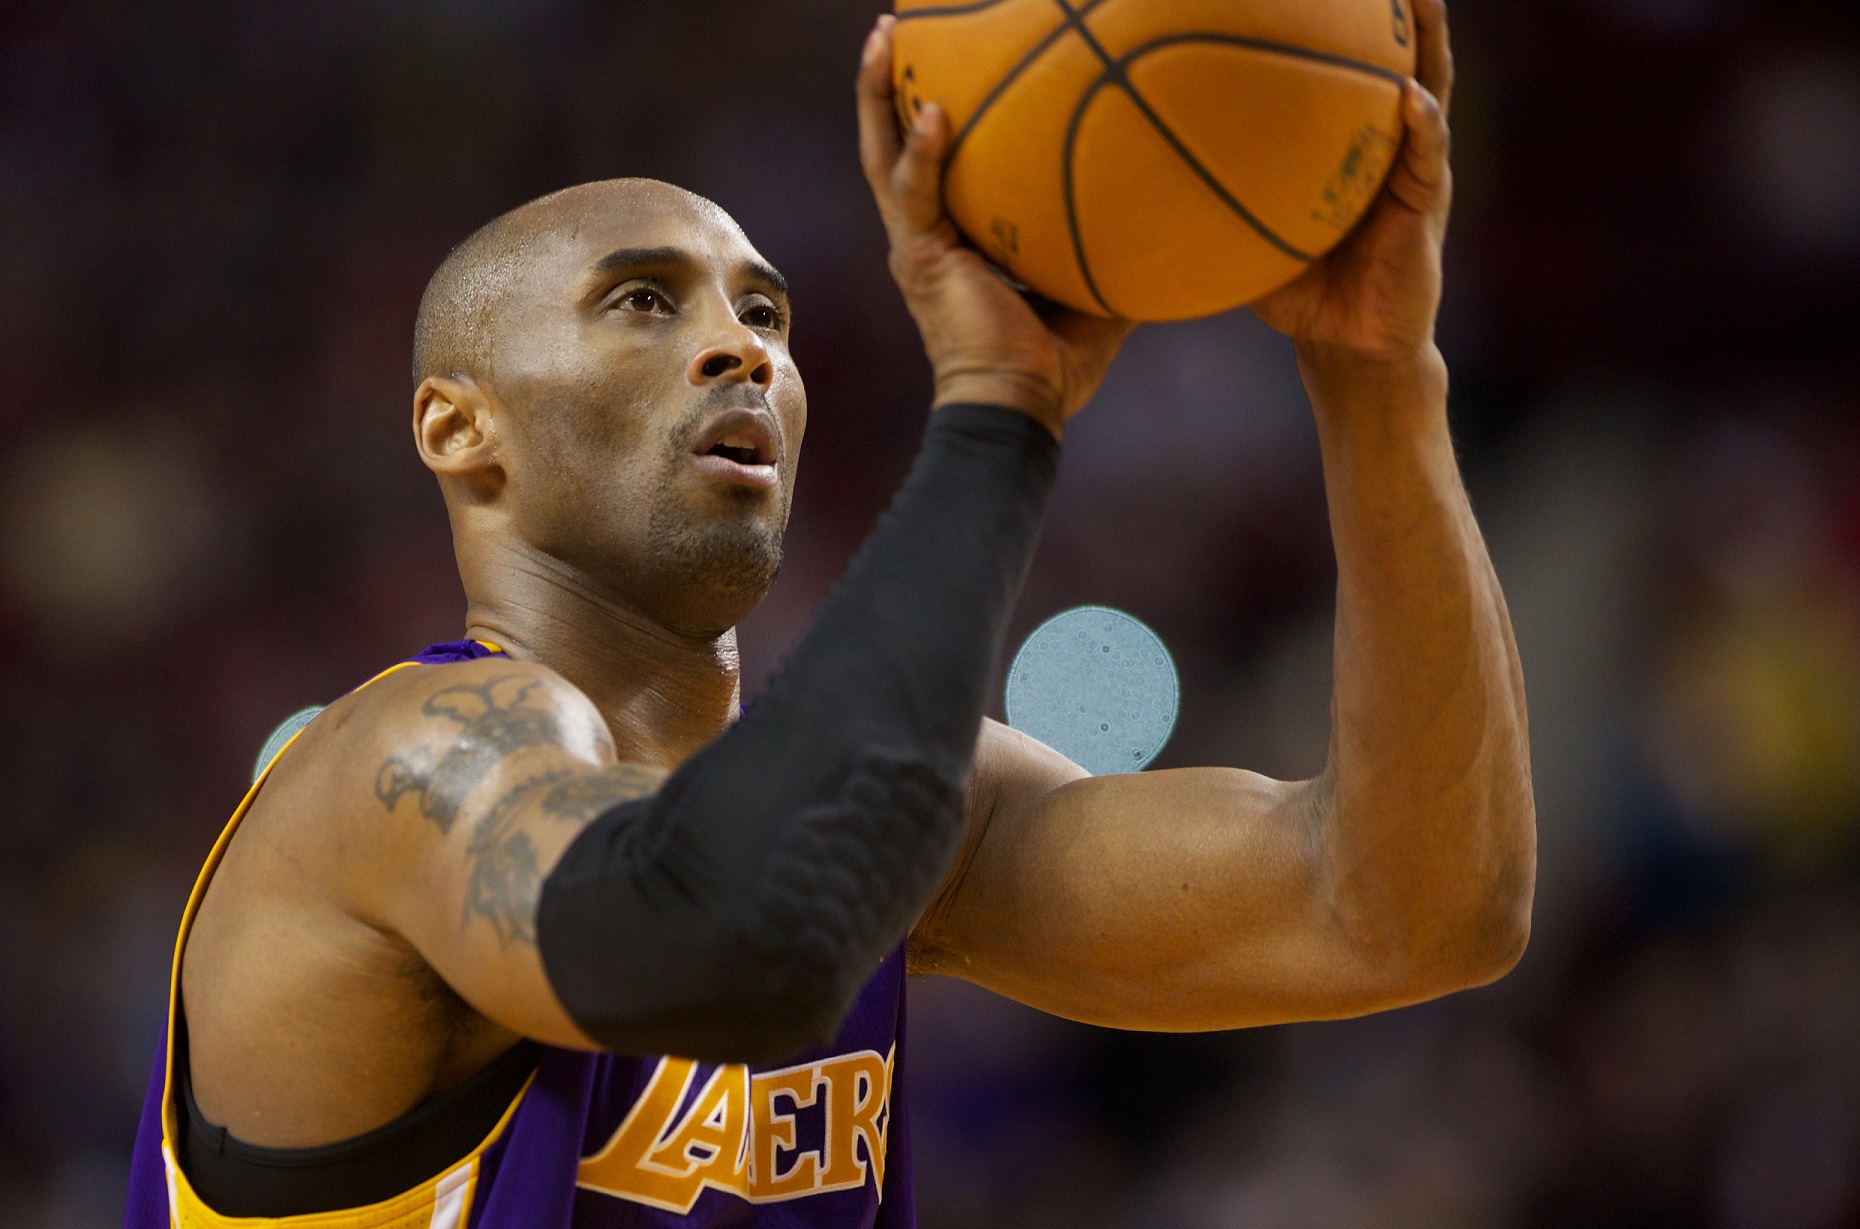 Roundtable: What are your favorite memories of Kobe Bryant wearing